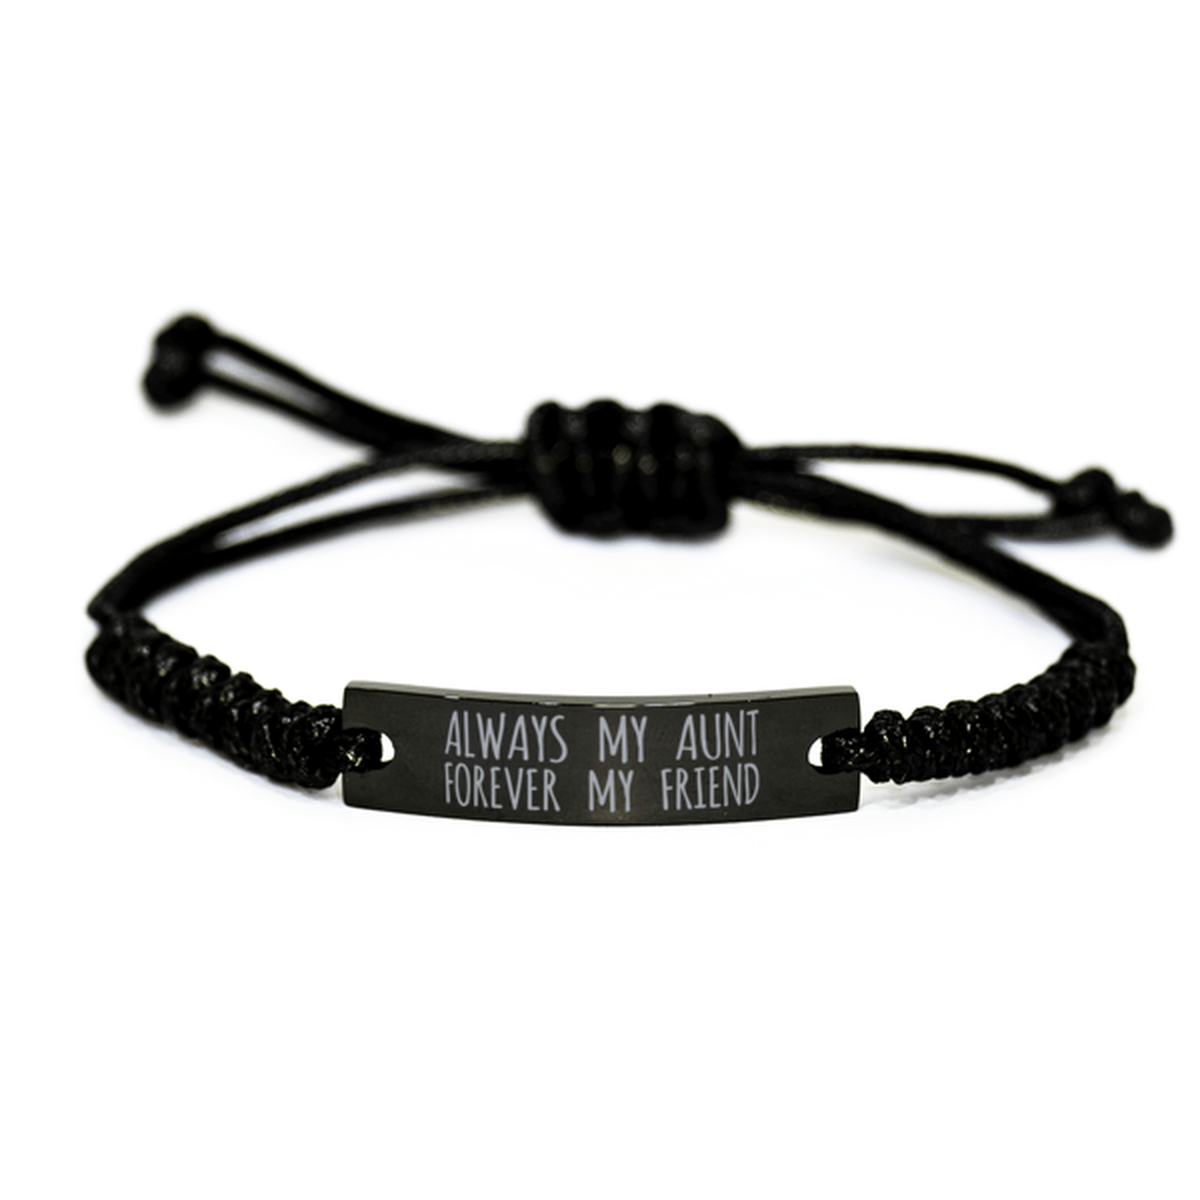 Inspirational Aunt Black Rope Bracelet, Always My Aunt Forever My Friend, Best Birthday Gifts For Family